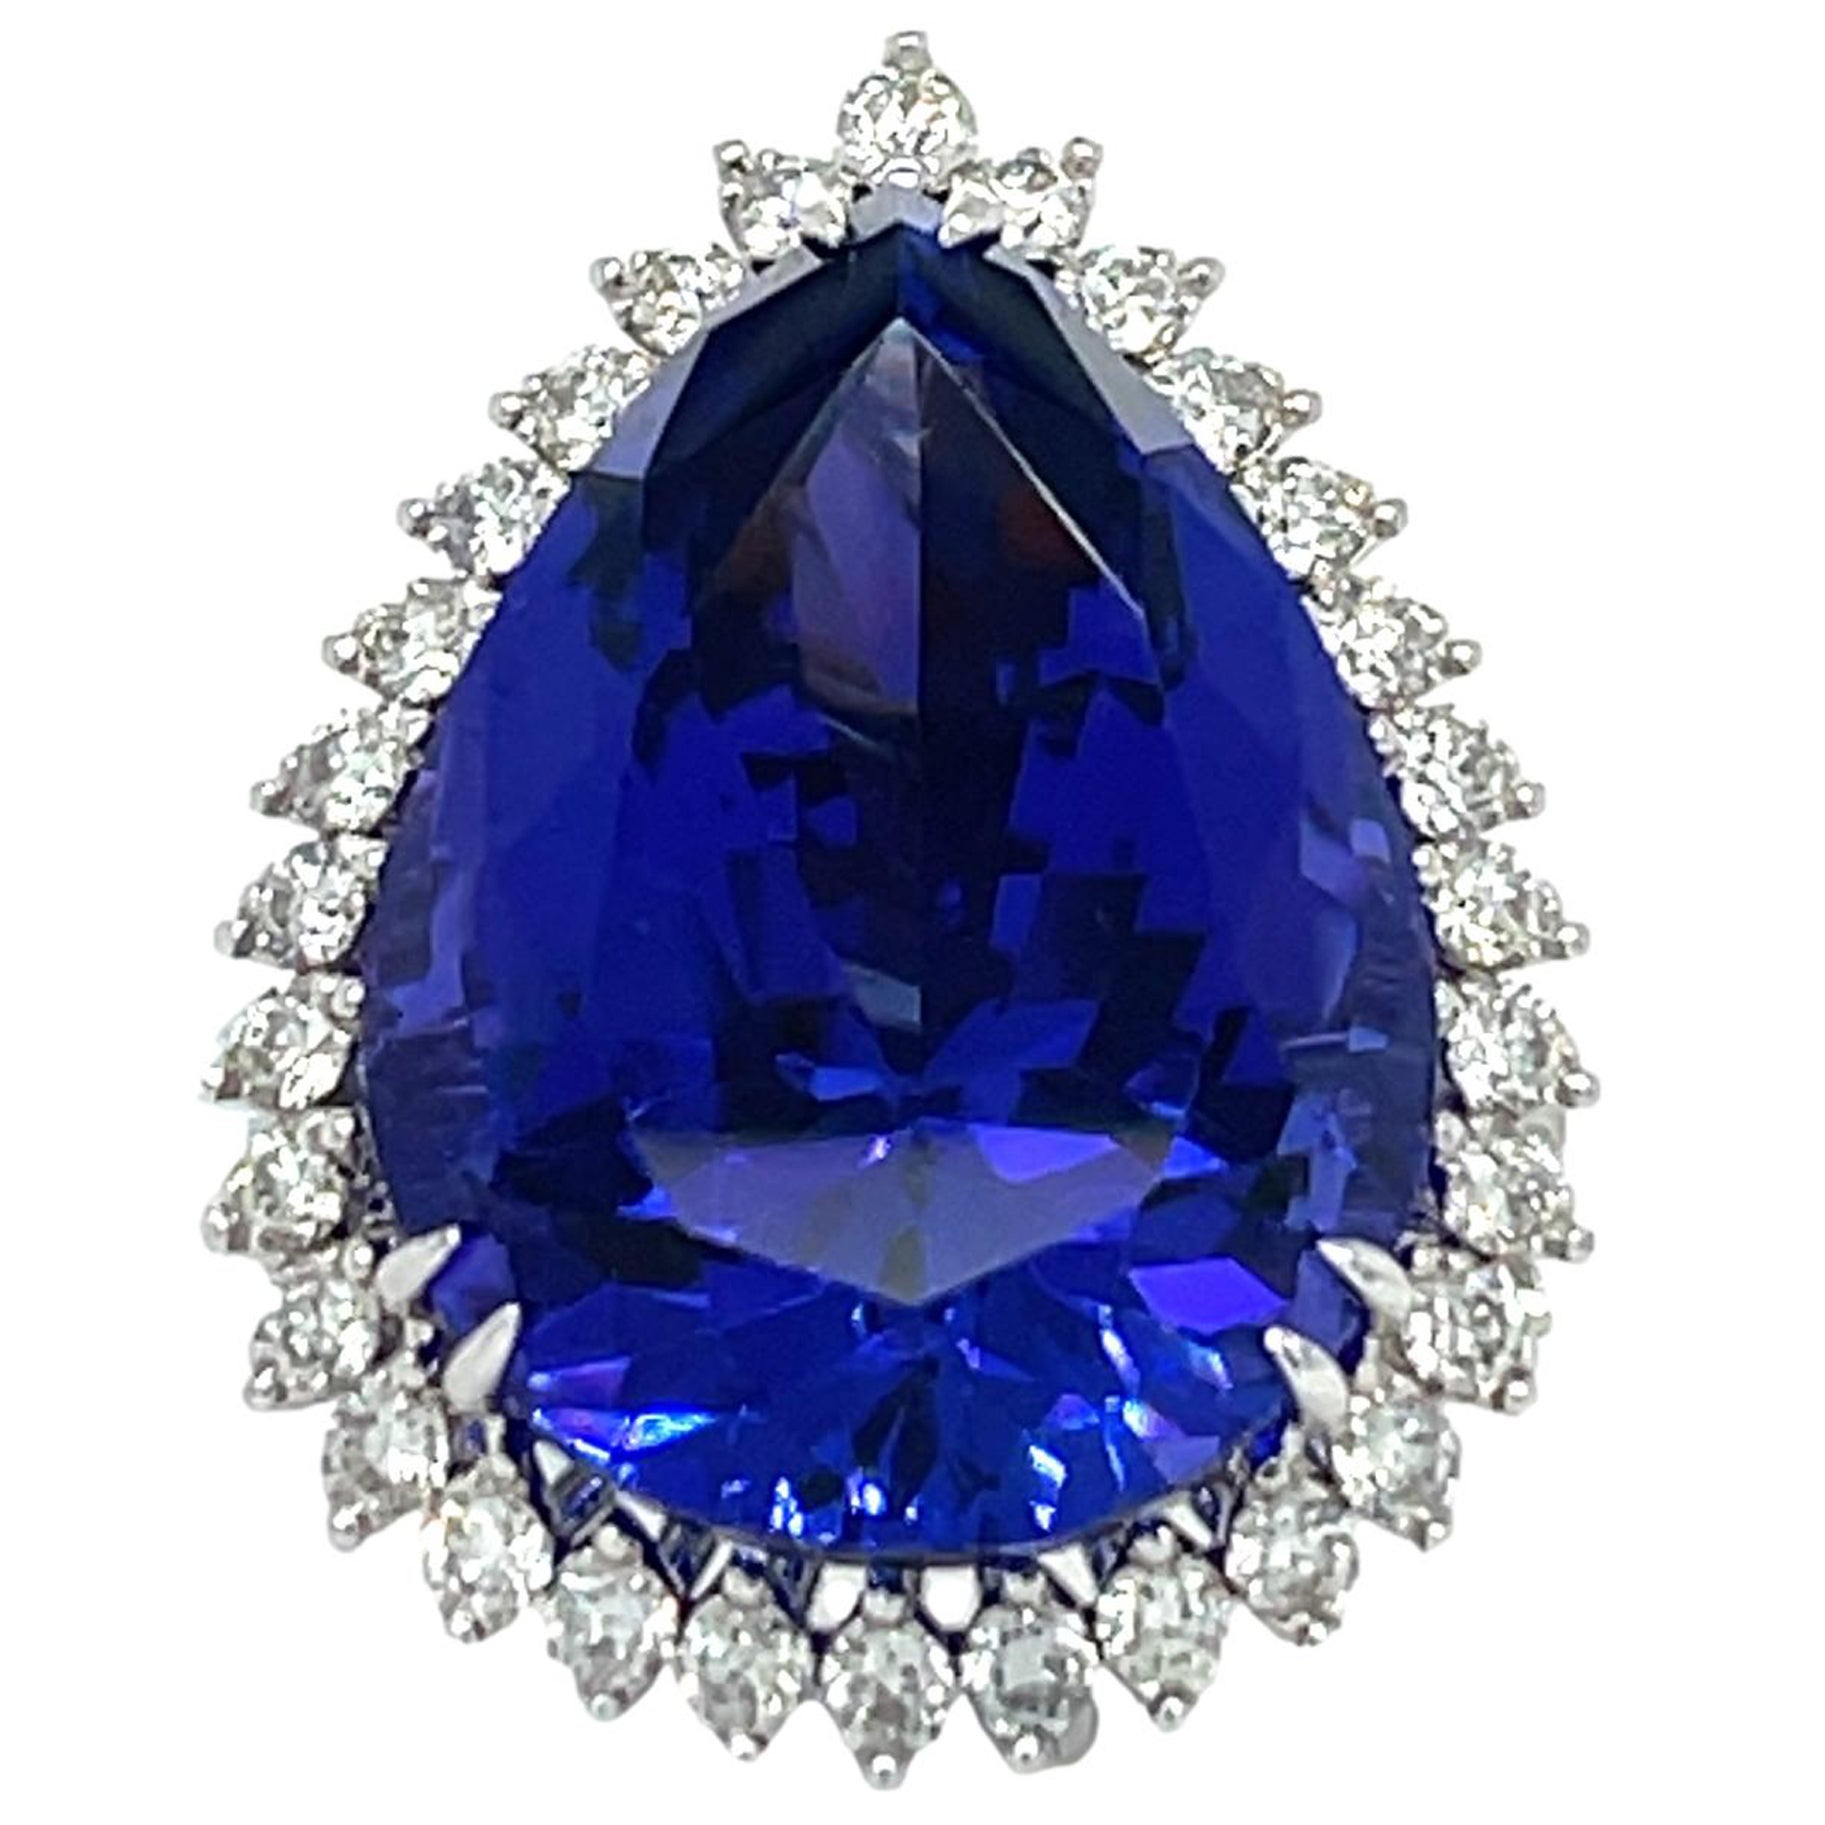 22 ct AAA Tanzanite and Diamond Ring in 18K White Gold For Sale